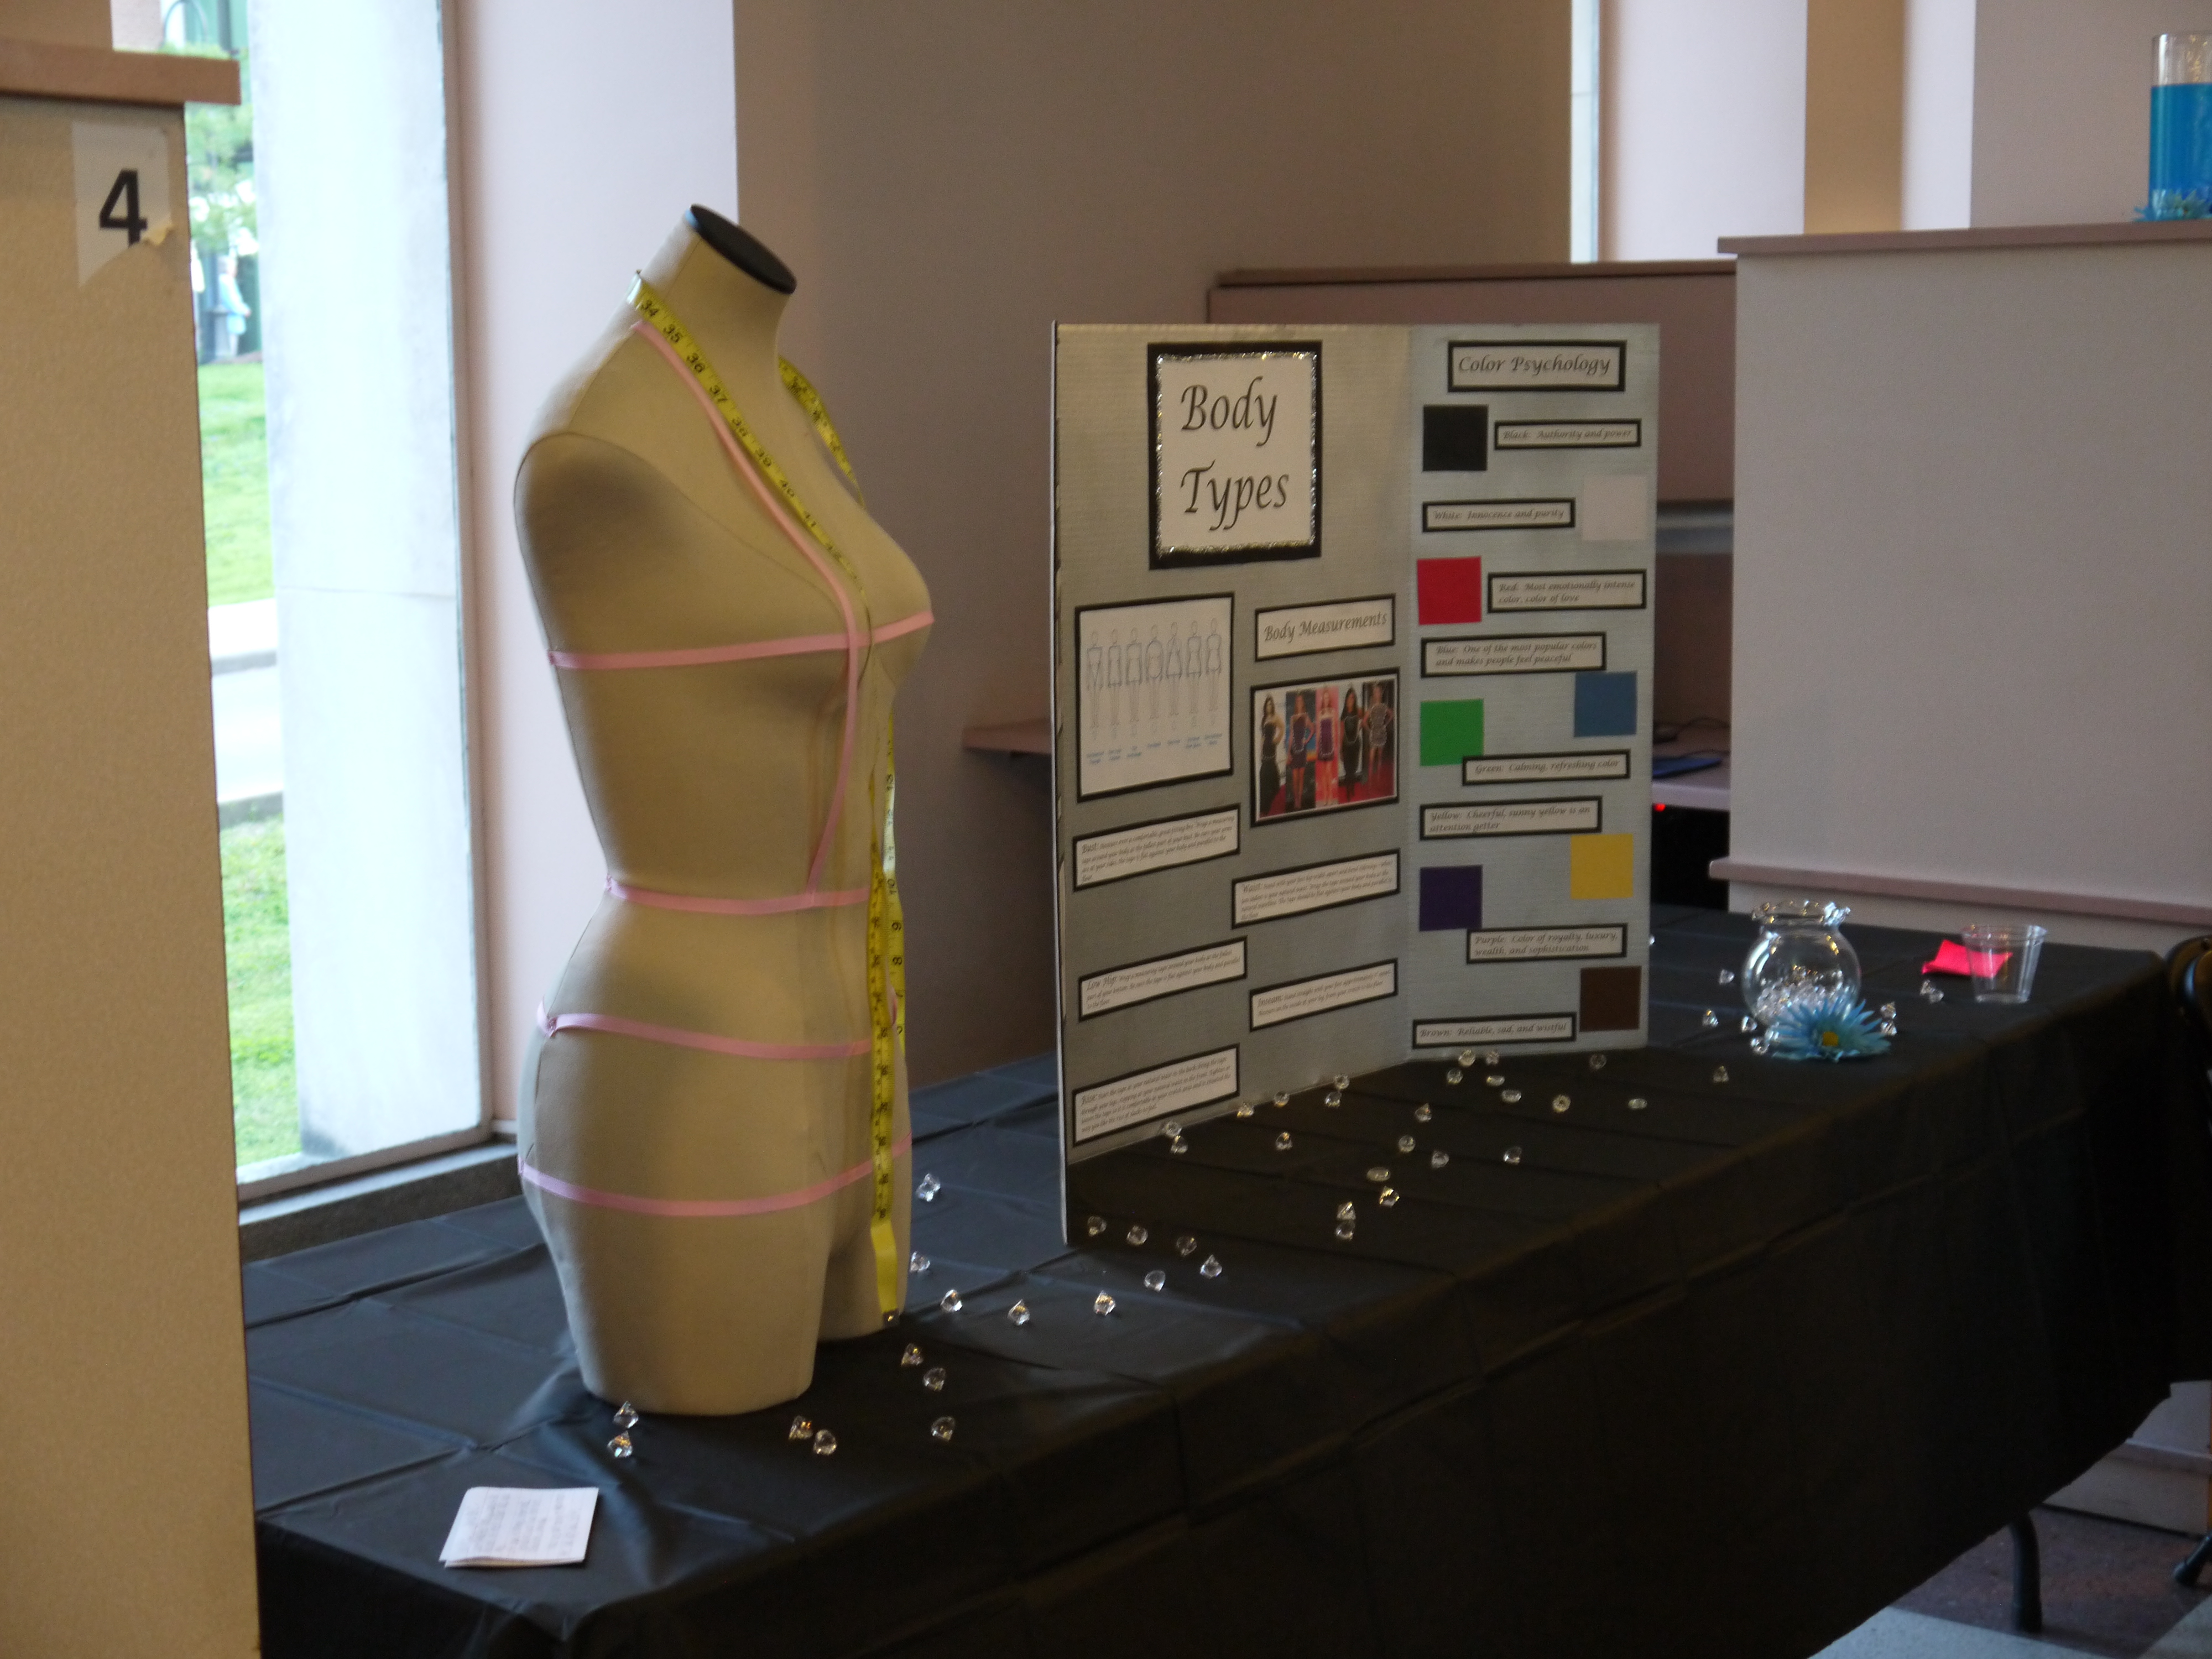 Fashion Merchandising Projects, Events and Opportunities - Fontbonne University